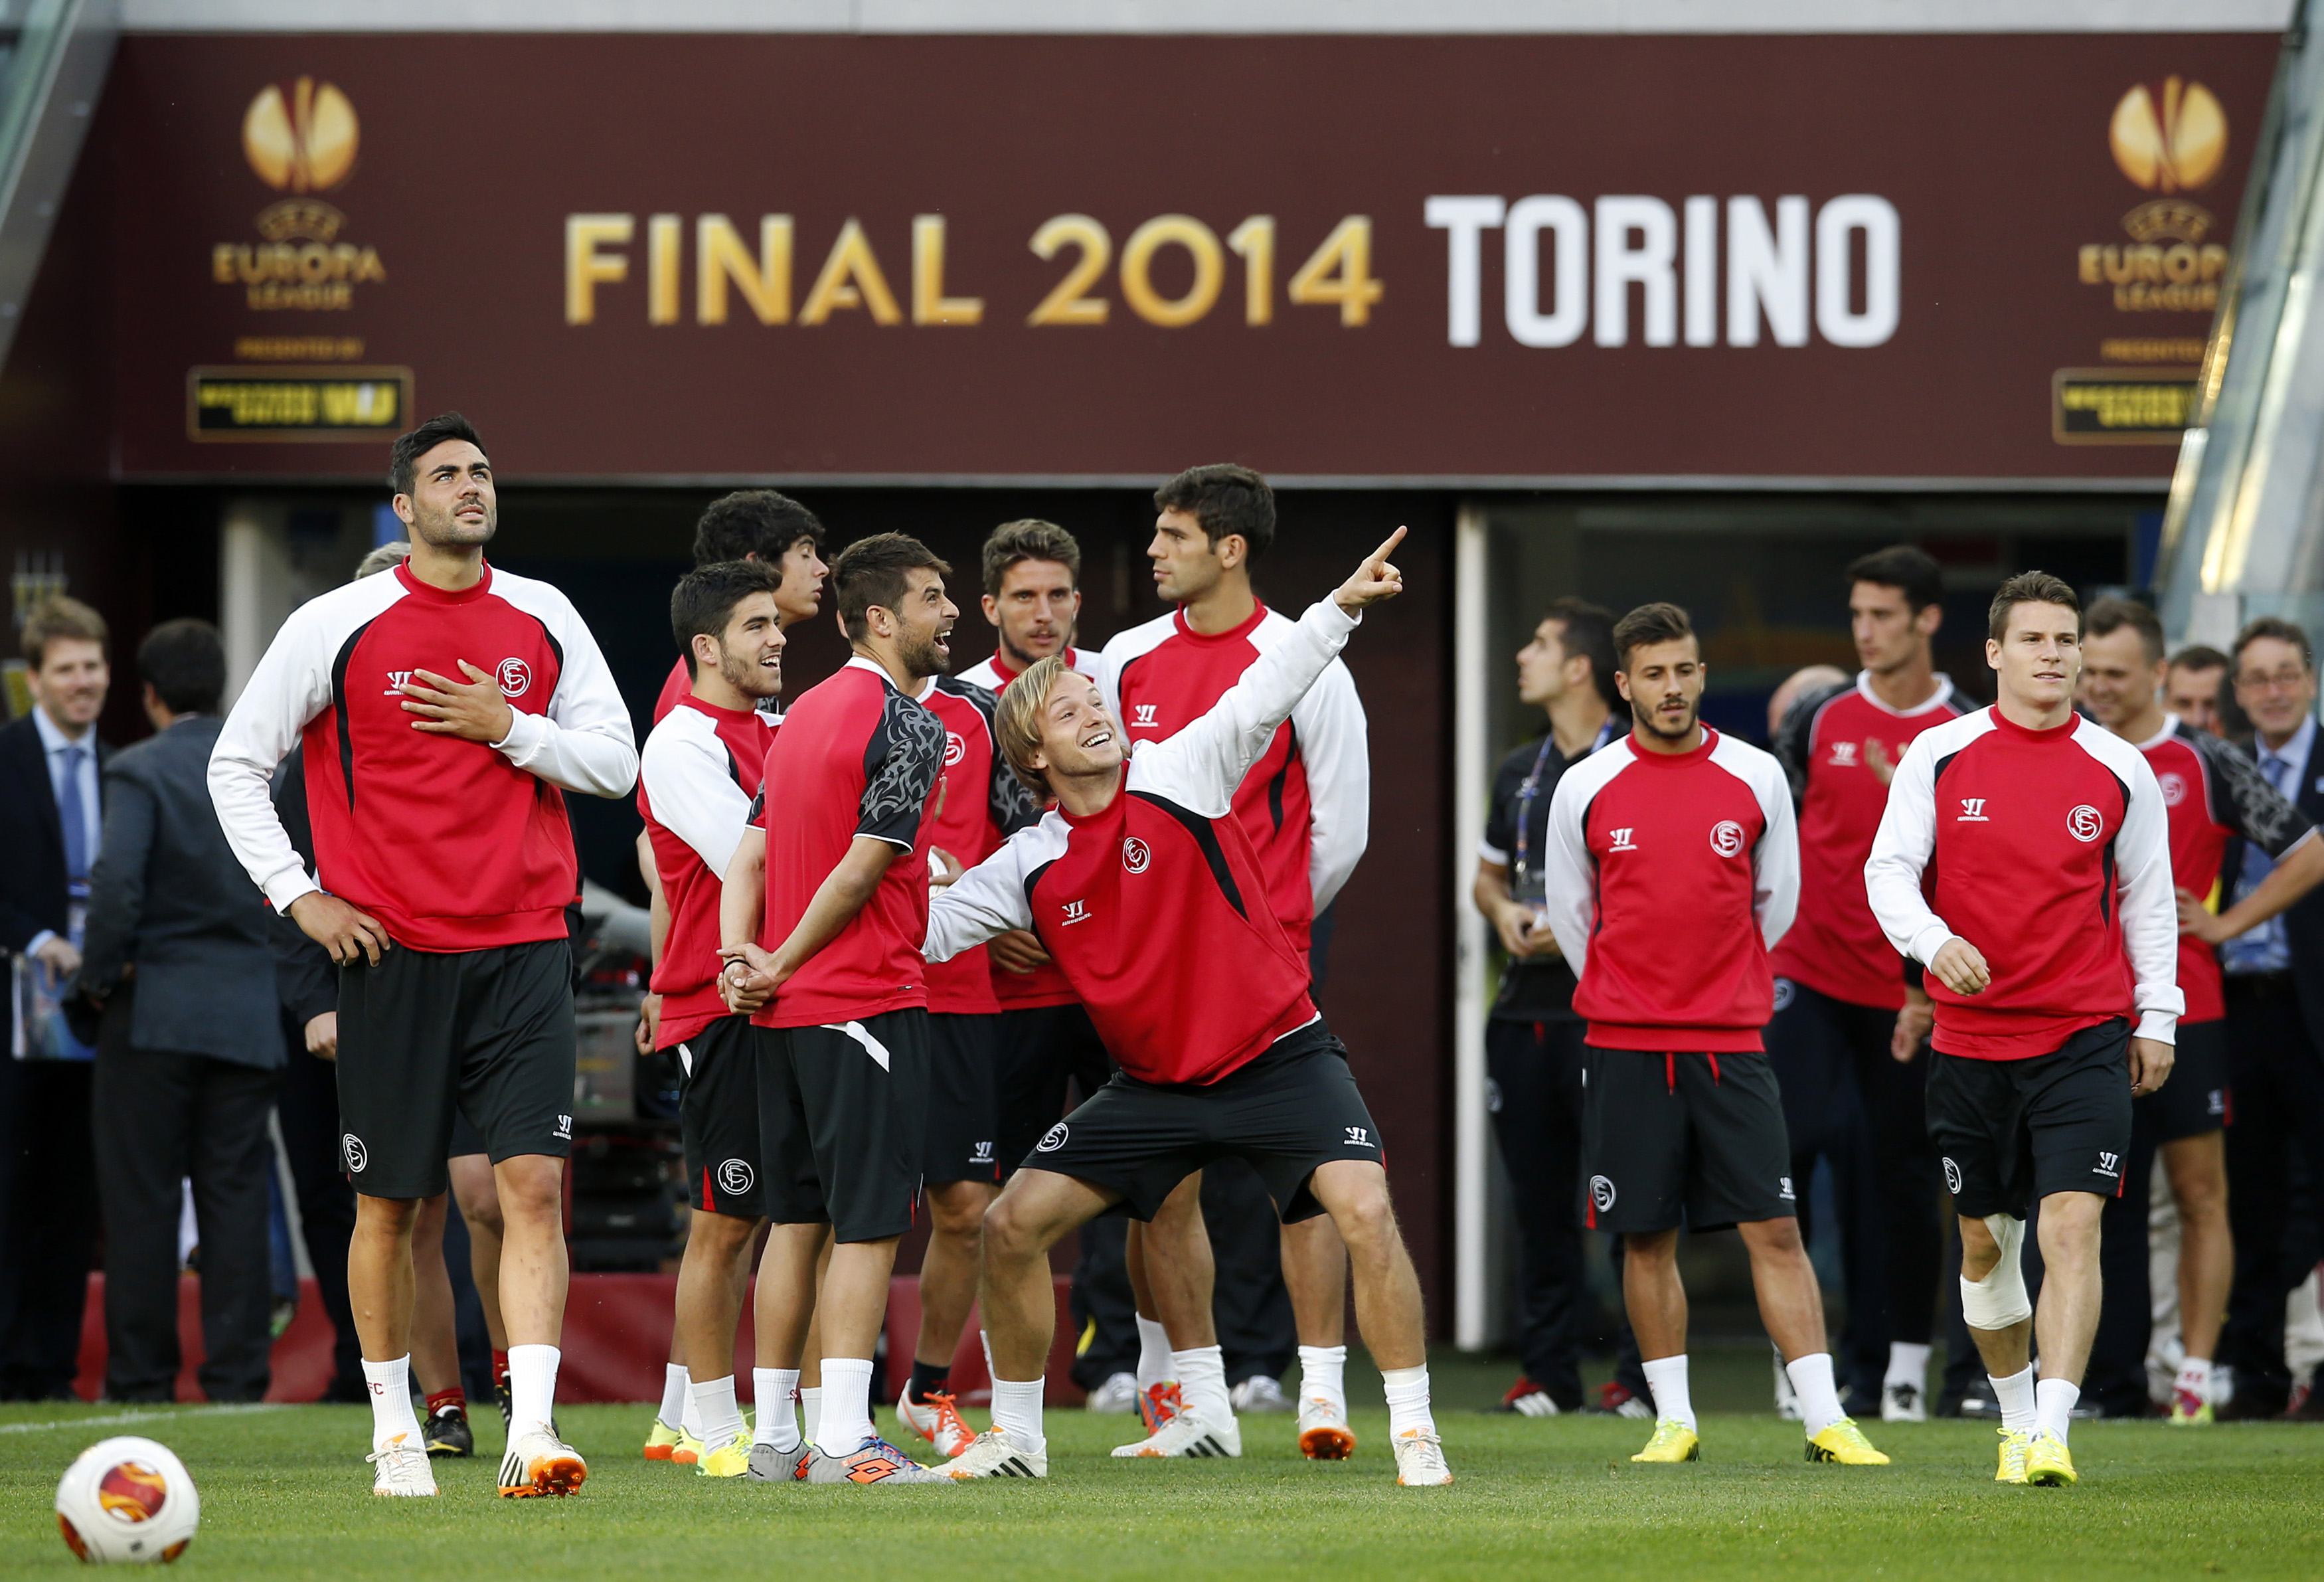 Sevilla's Ivan Rakitic gestures next to his teammates during a training session at the Juventus stadium in Torino May 13, 2014. Sevilla and Benfica will play their Europa League final soccer match on Wednesday. REUTERS/Albert Gea (ITALY - Tags: SPORT SOCCER)